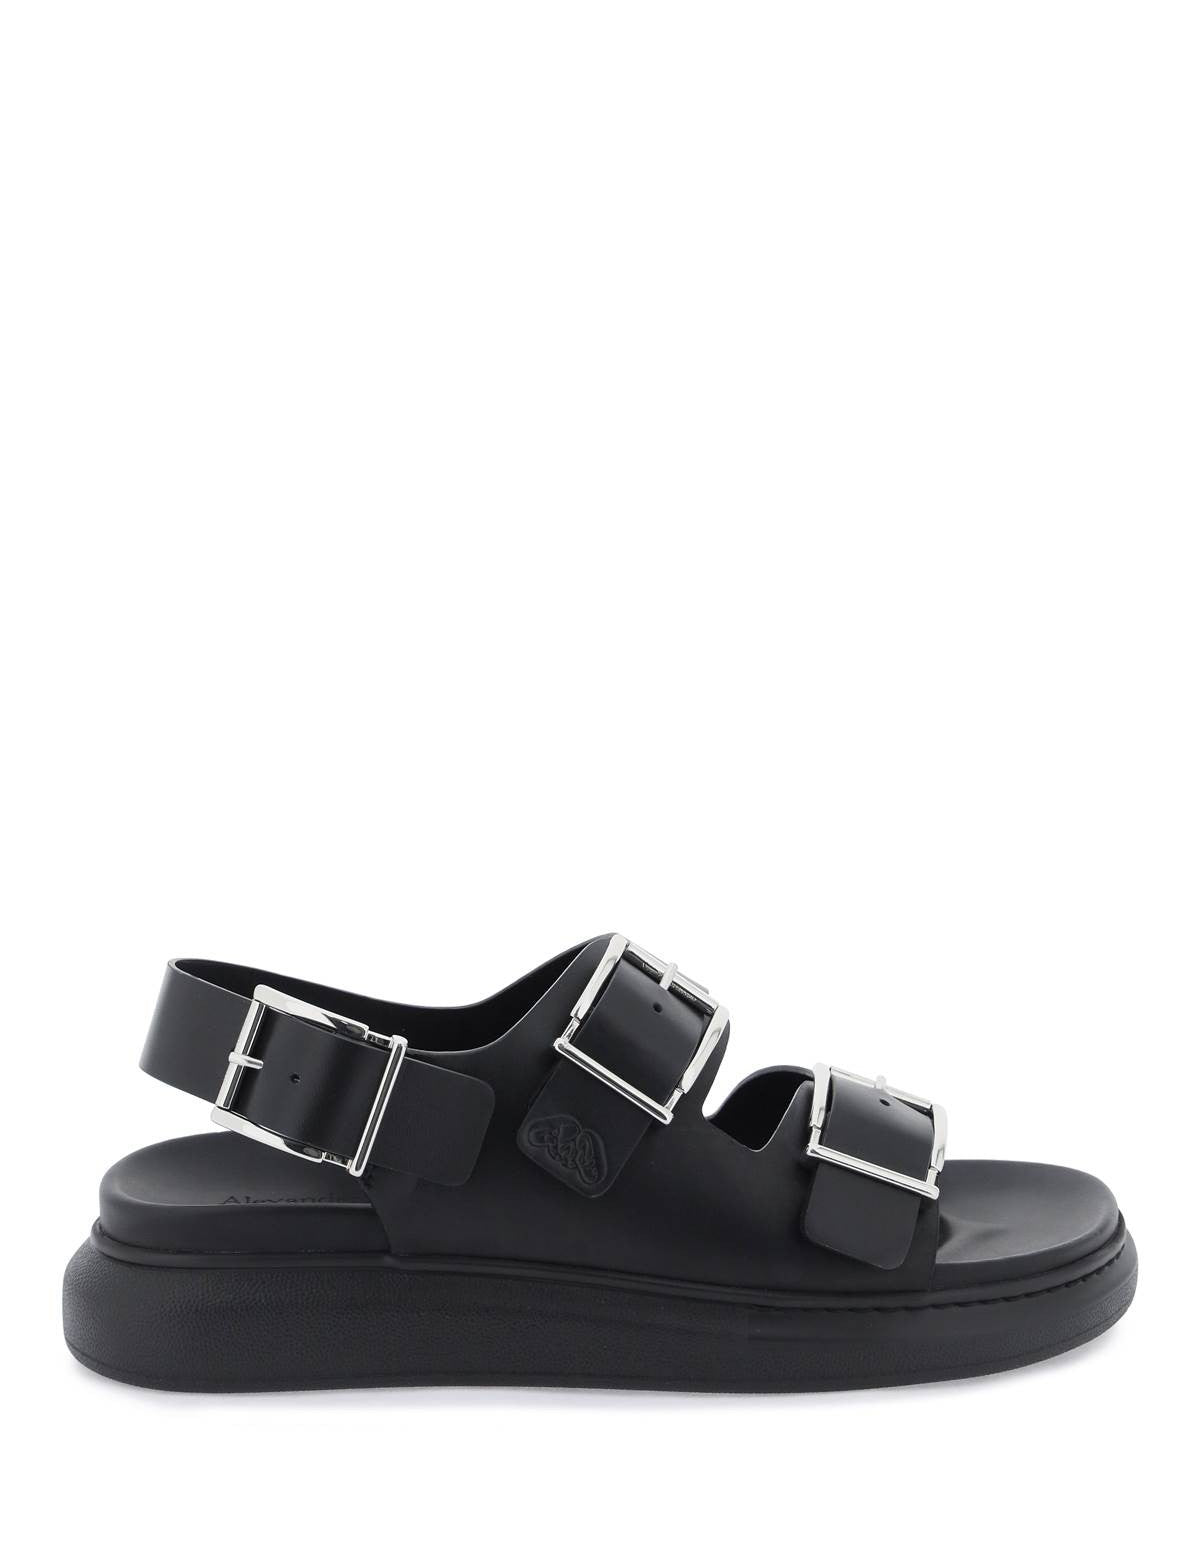 alexander-mcqueen-leather-sandals-with-maxi-buckles.jpg